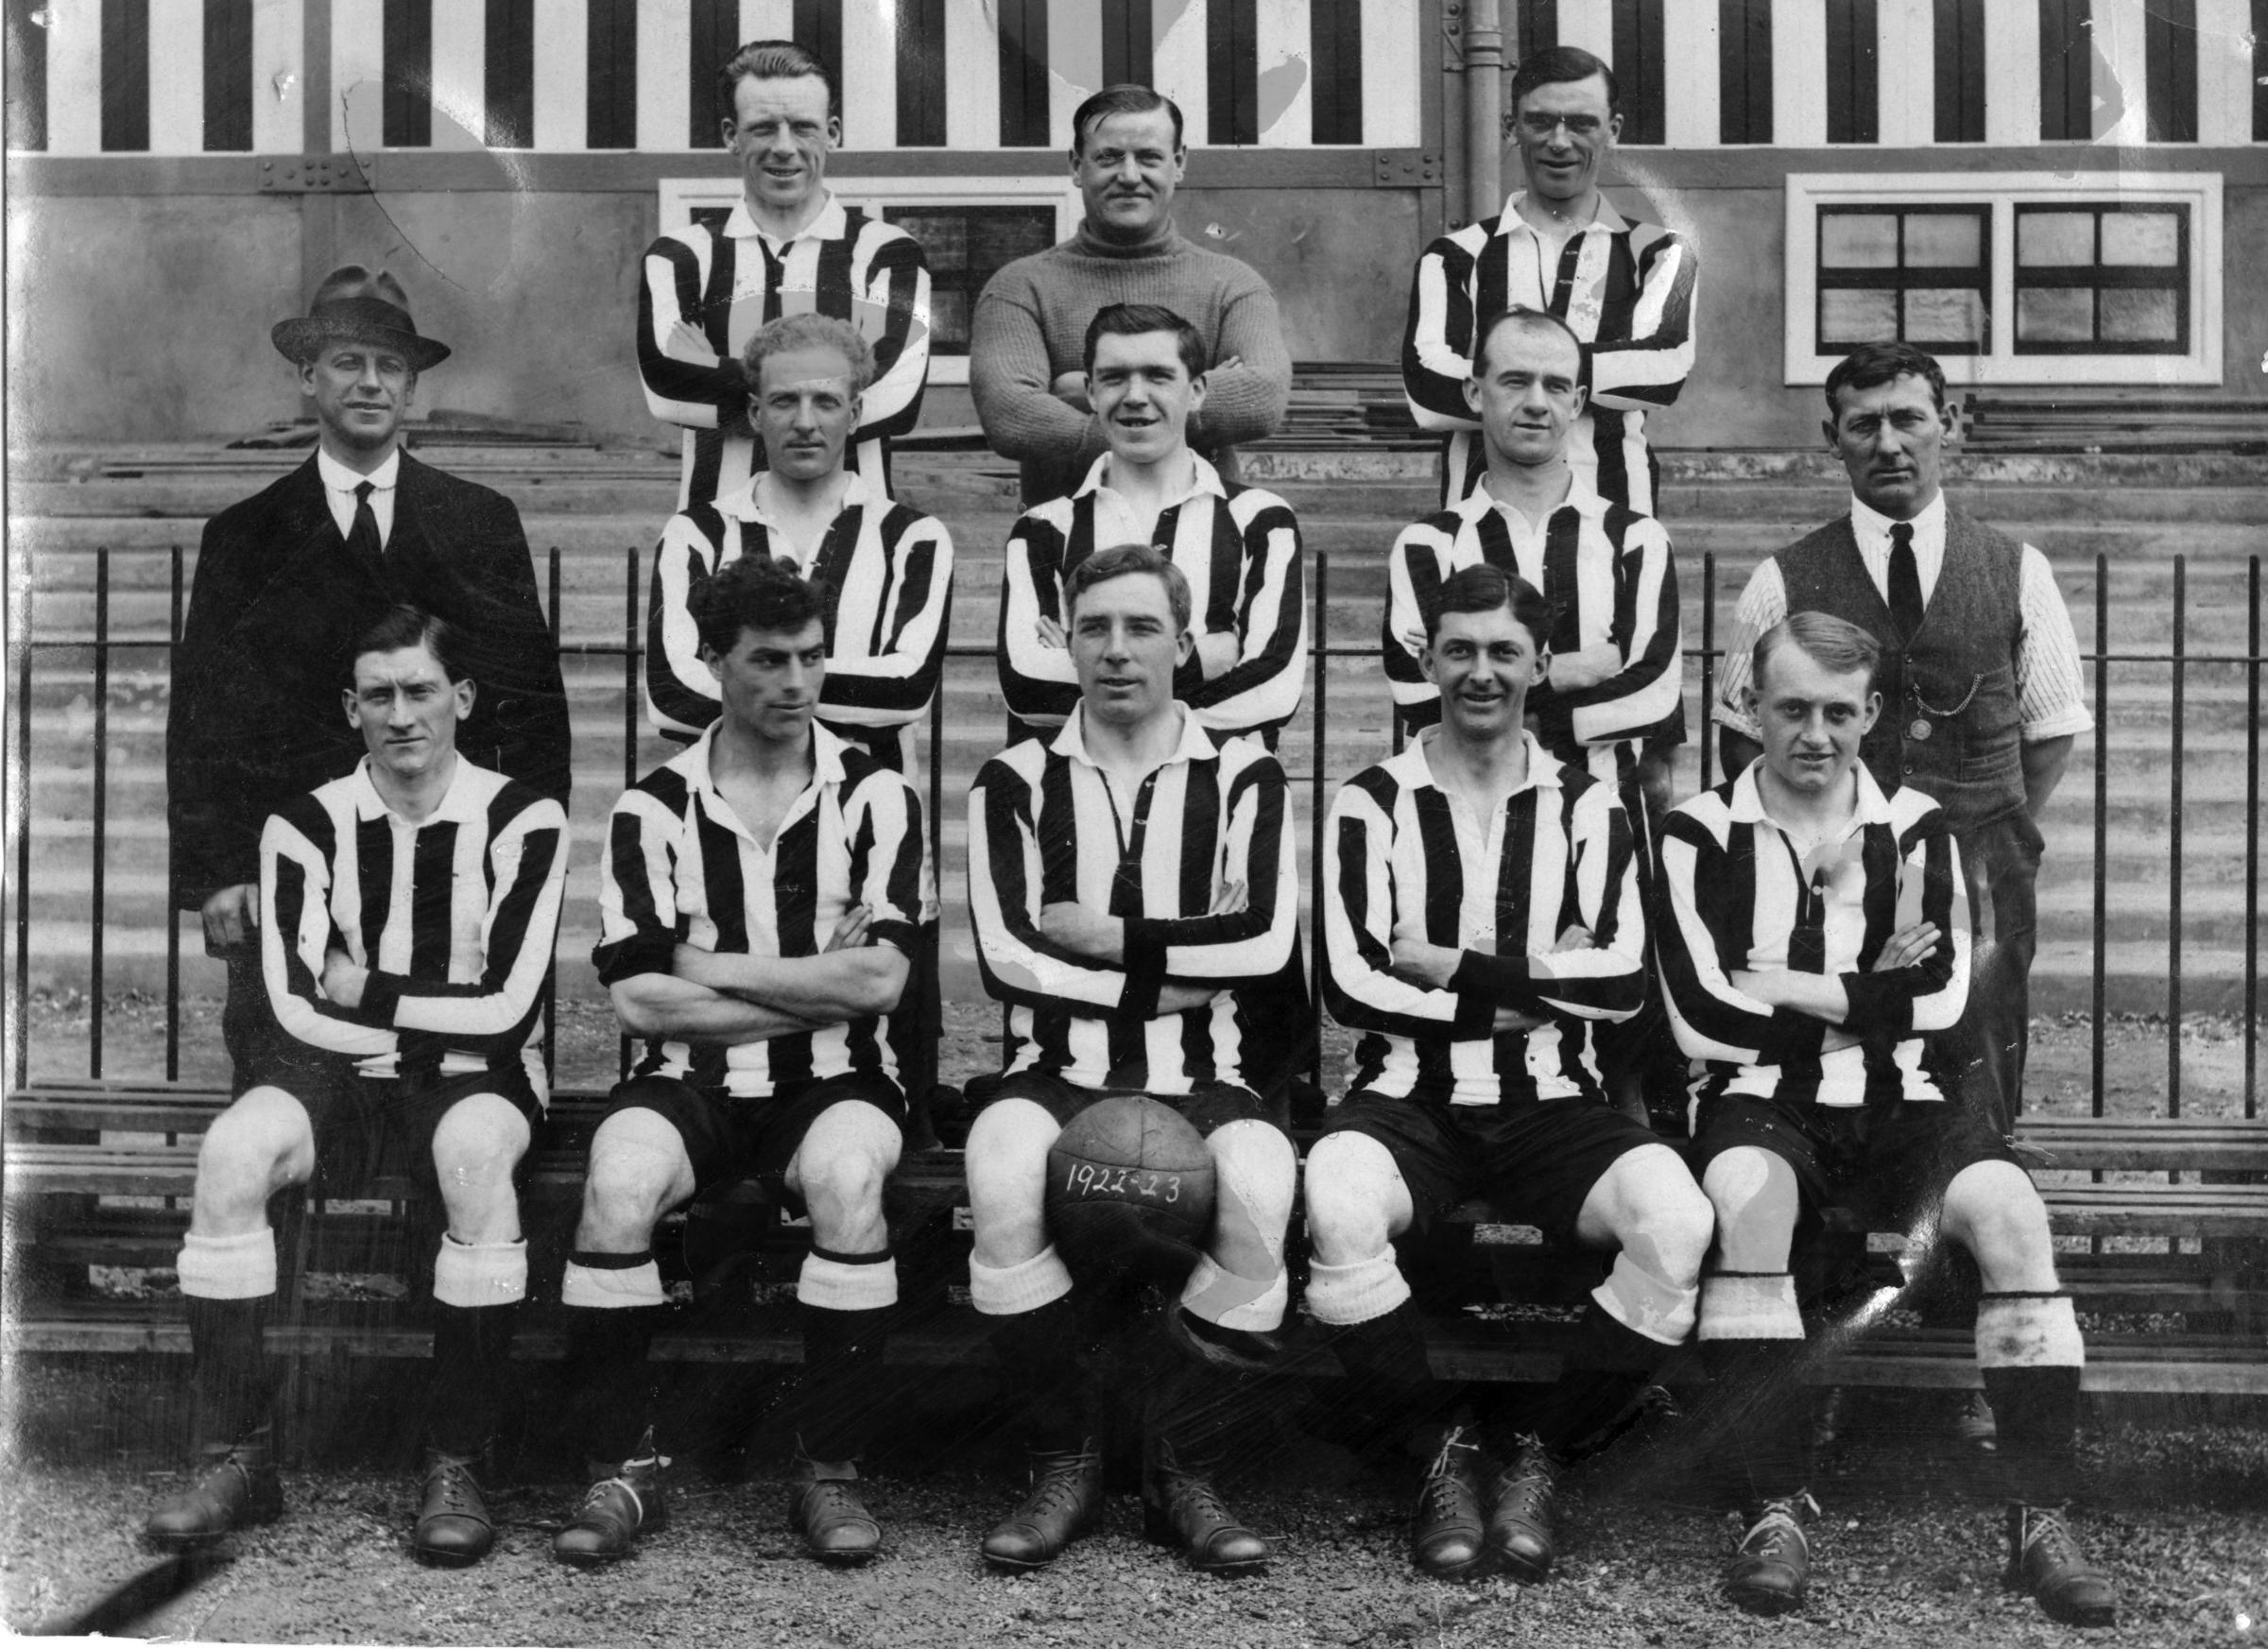 The 1922/23 squad finished 10th in Division Three (South) under Harry Kent